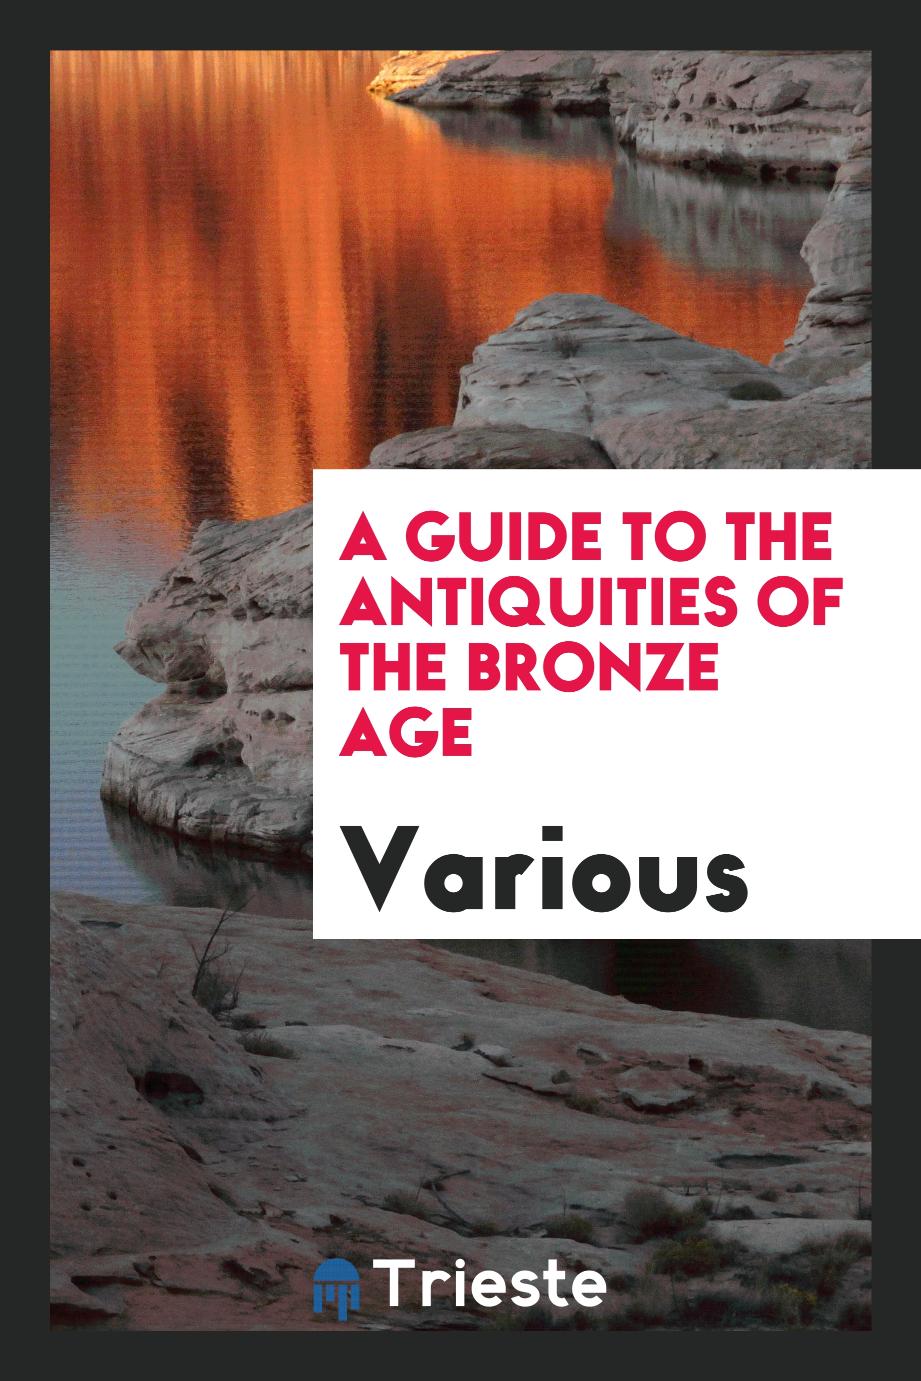 A guide to the antiquities of the bronze age